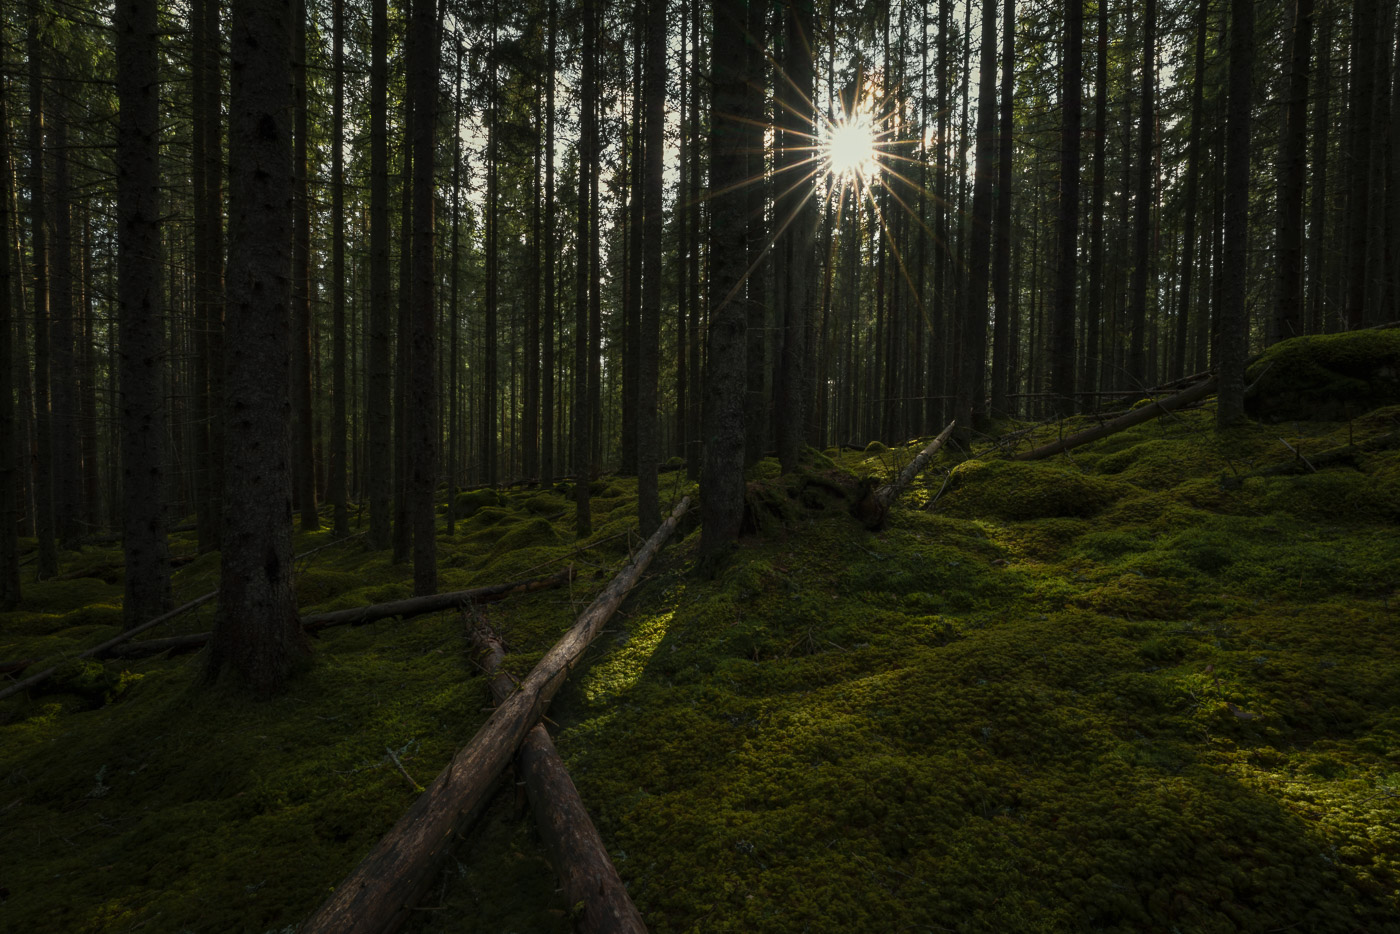 Star shaped sun in a shady mossy forest in Sweden